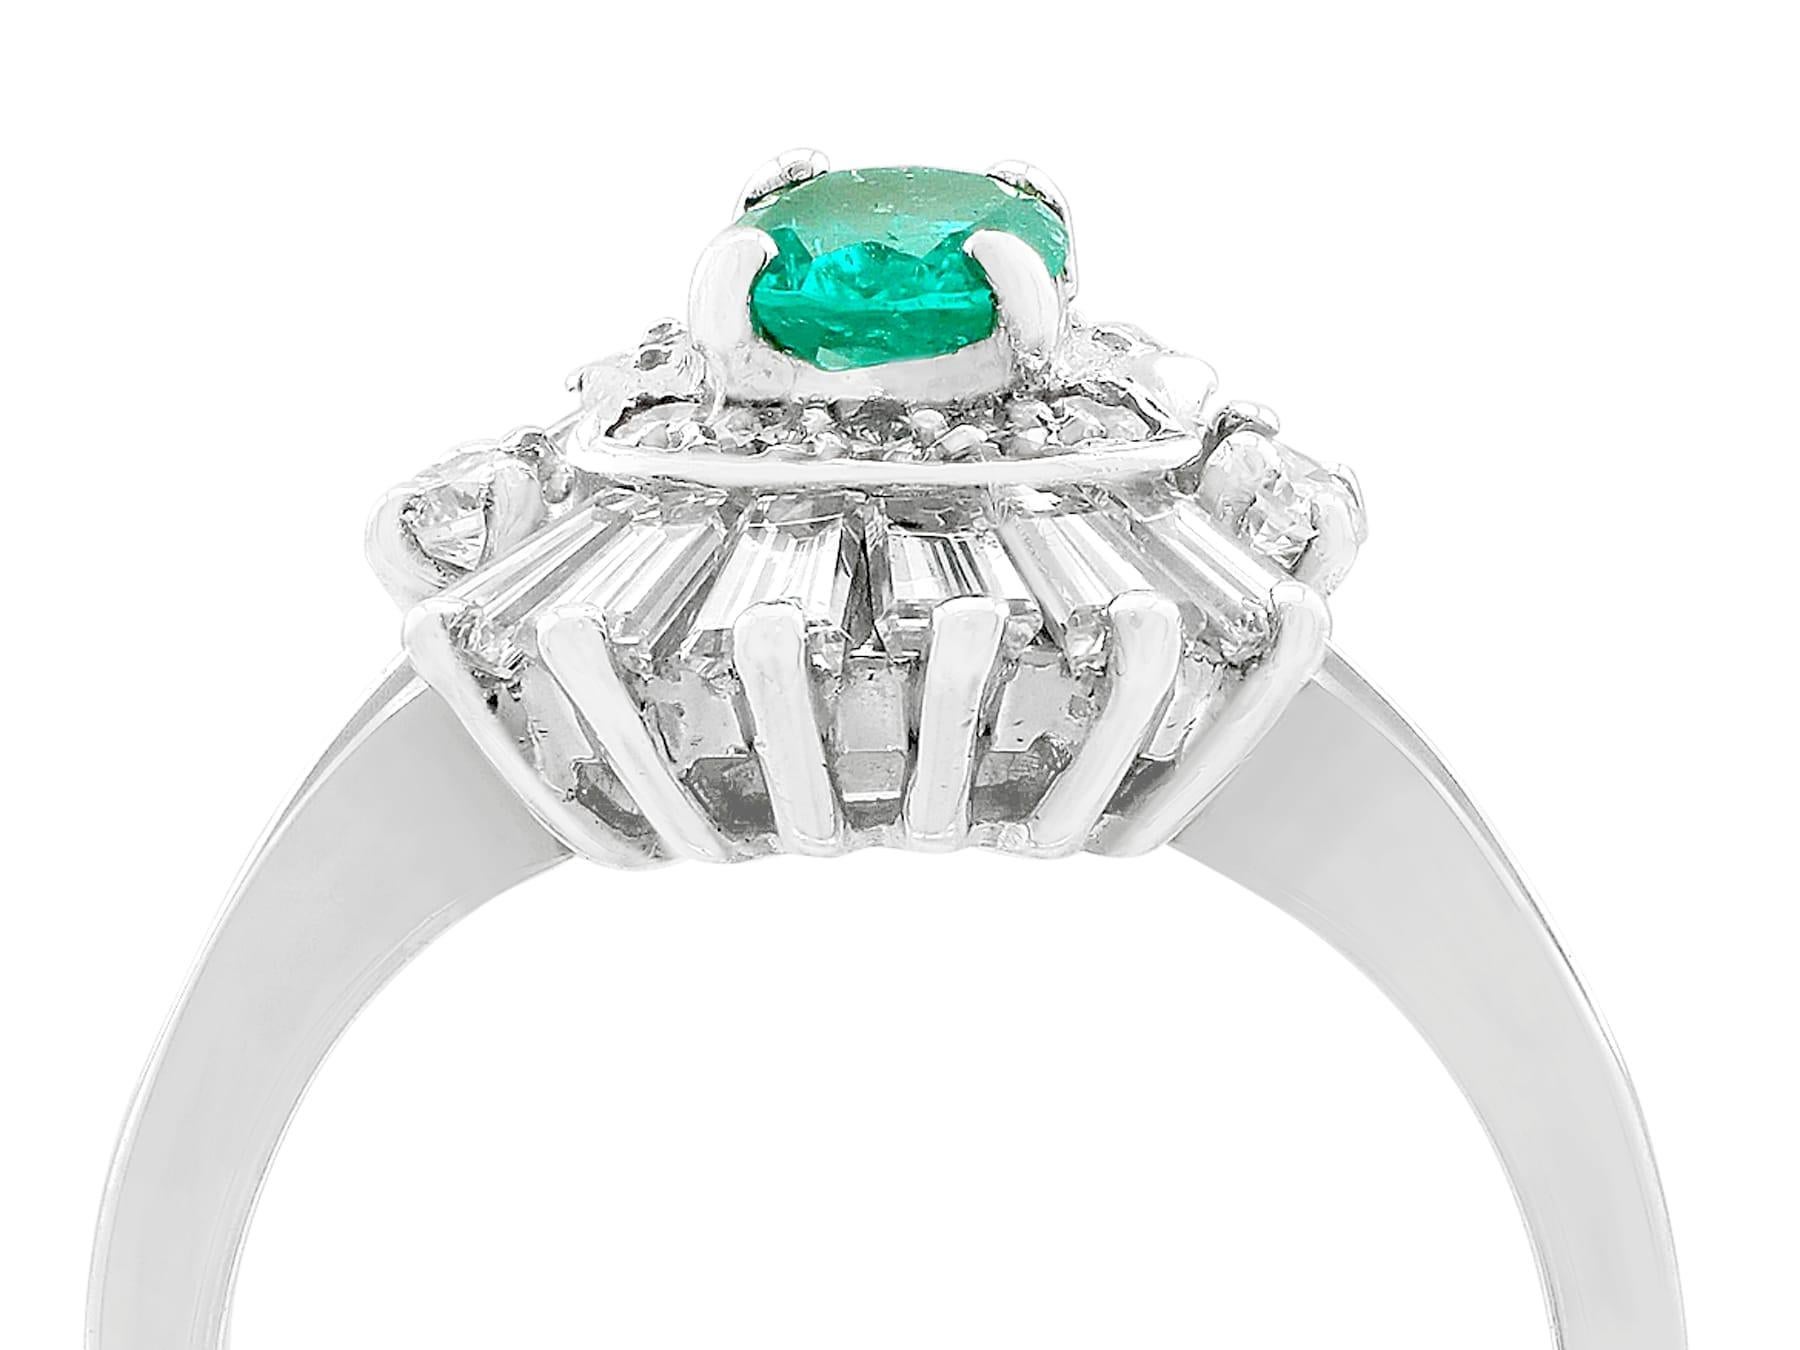 An impressive vintage French 0.45 carat emerald and 0.95 carat diamond, 18 karat white gold dress ring; part of our diverse antique jewelry and estate jewelry collections.

This fine and impressive antique emerald and diamond dress ring has been